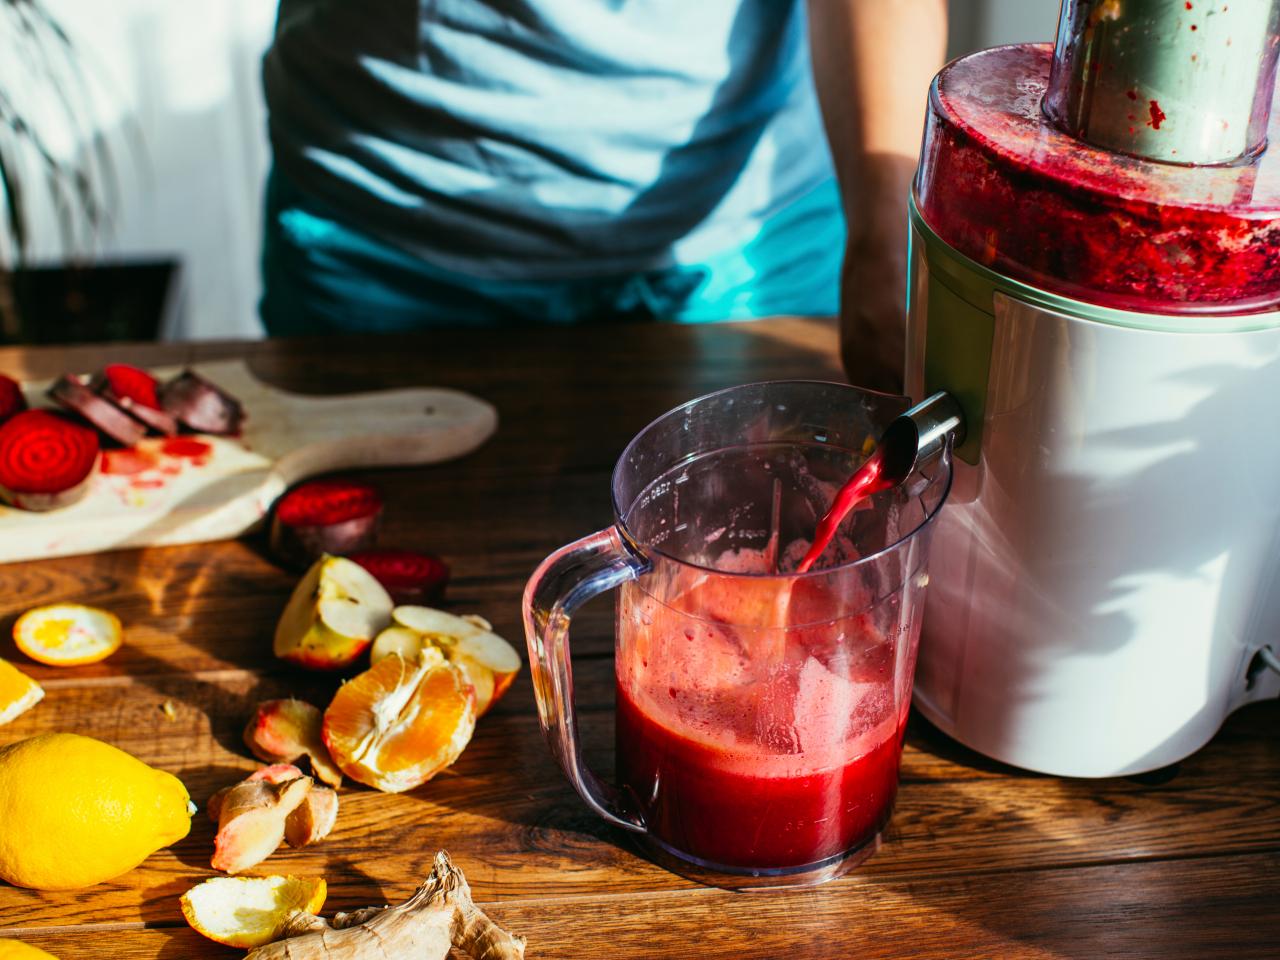 So…Let's Hang Out – Pump Up The Beet Juice